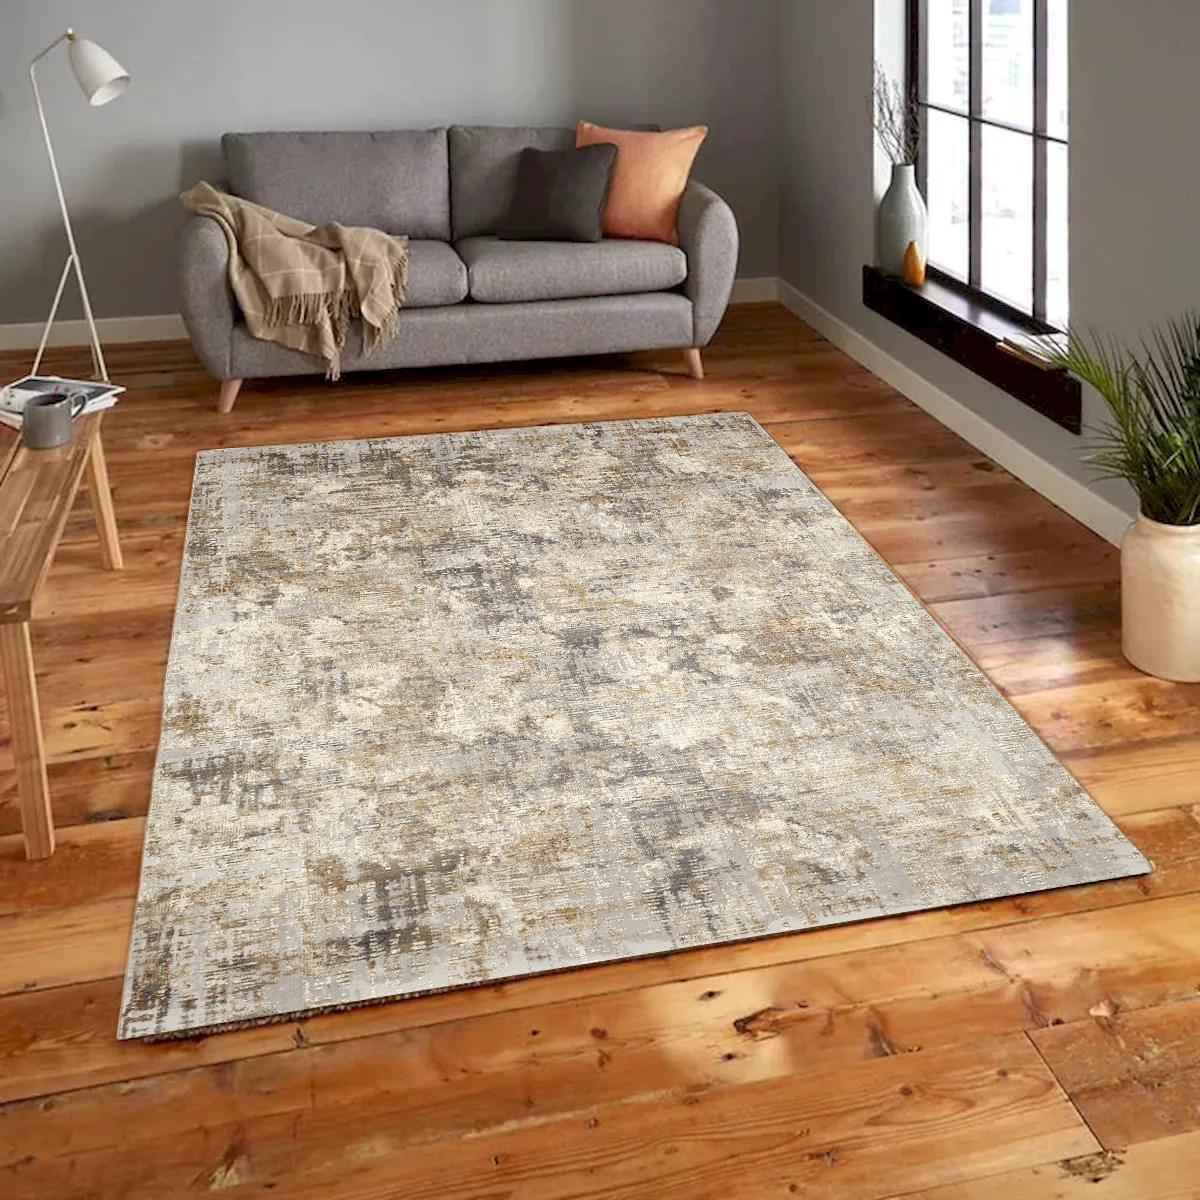 Picture of Mr. MJs Trading VA-CHA-46-1002 4 x 6 ft. Charisma Muted Ivory & Gray Distressed Abstract Rectangle Area Rug